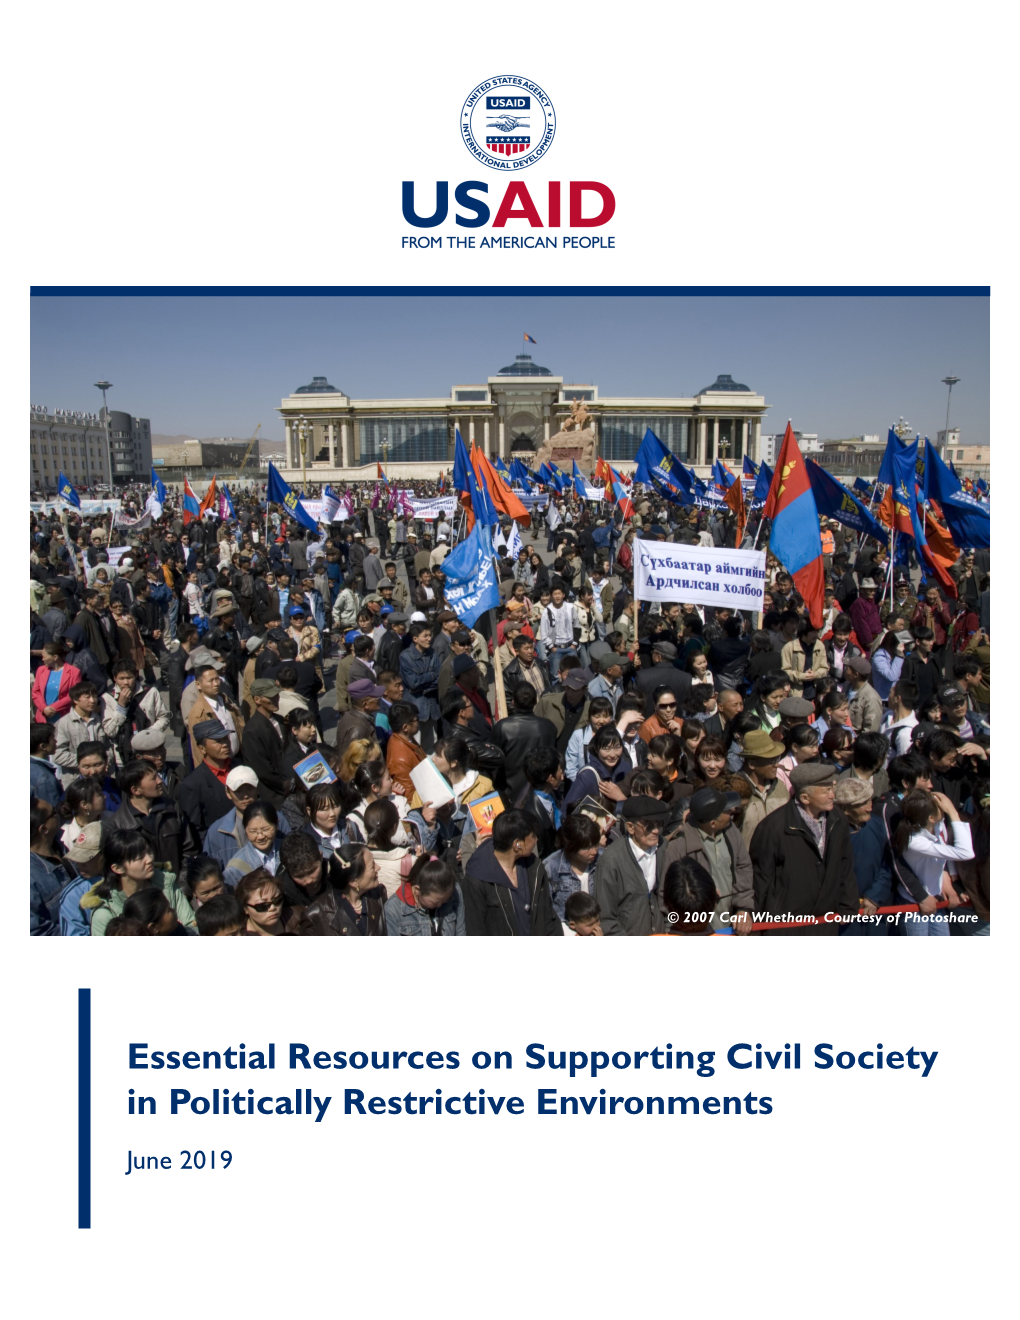 Essential Resources on Supporting Civil Society in Politically Restrictive Environments June 2019